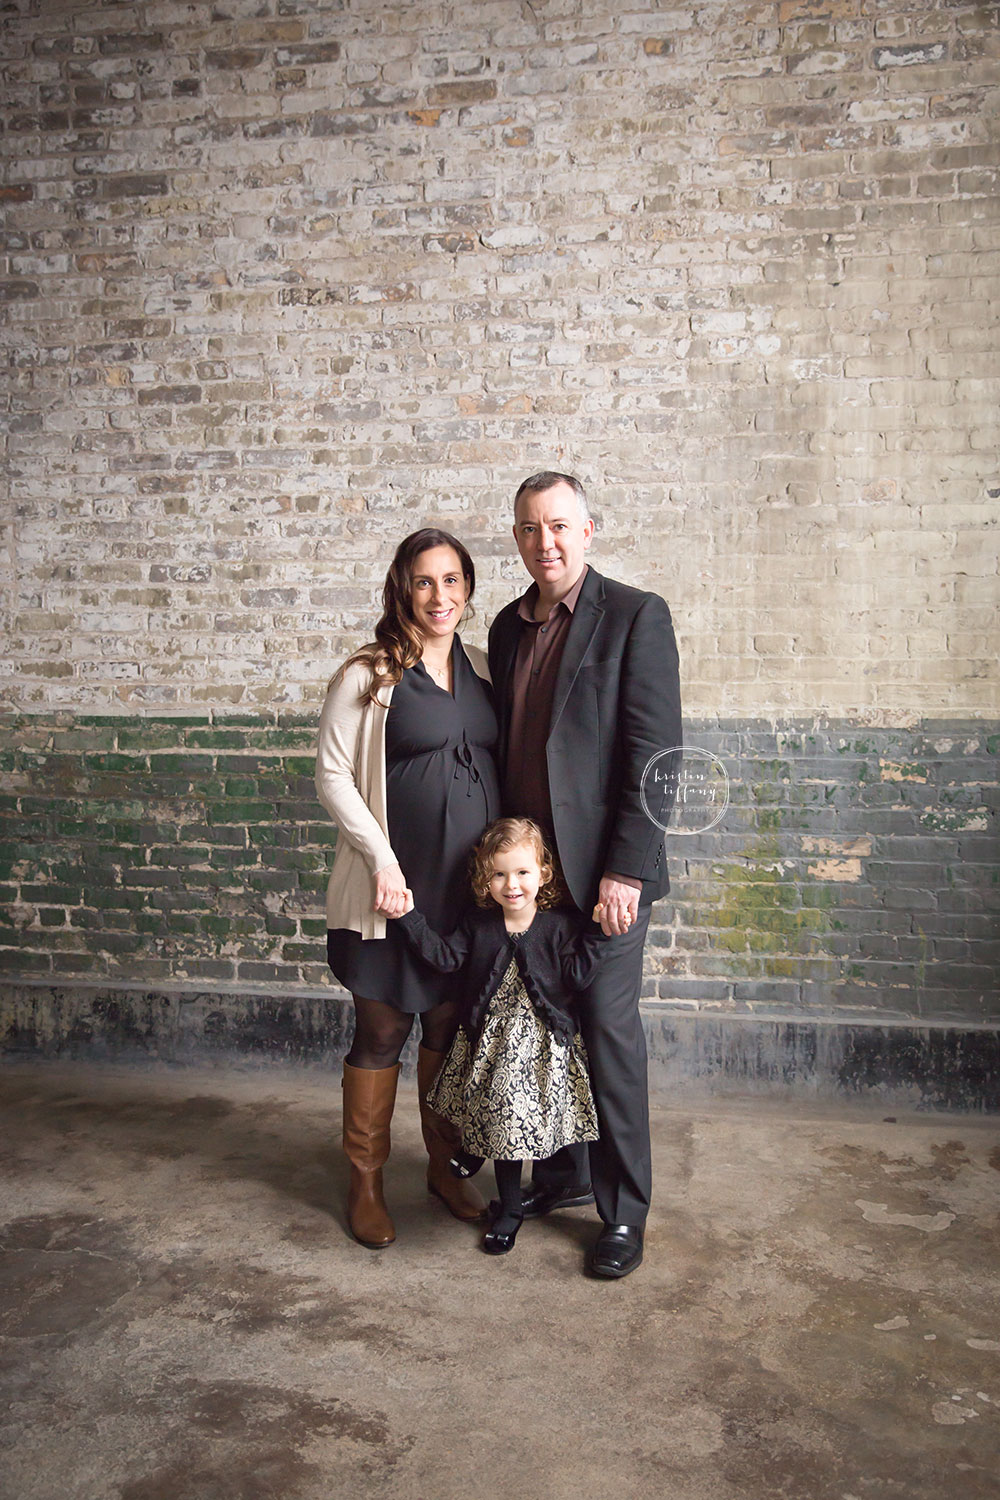 a family maternity photo by a distressed brick wall